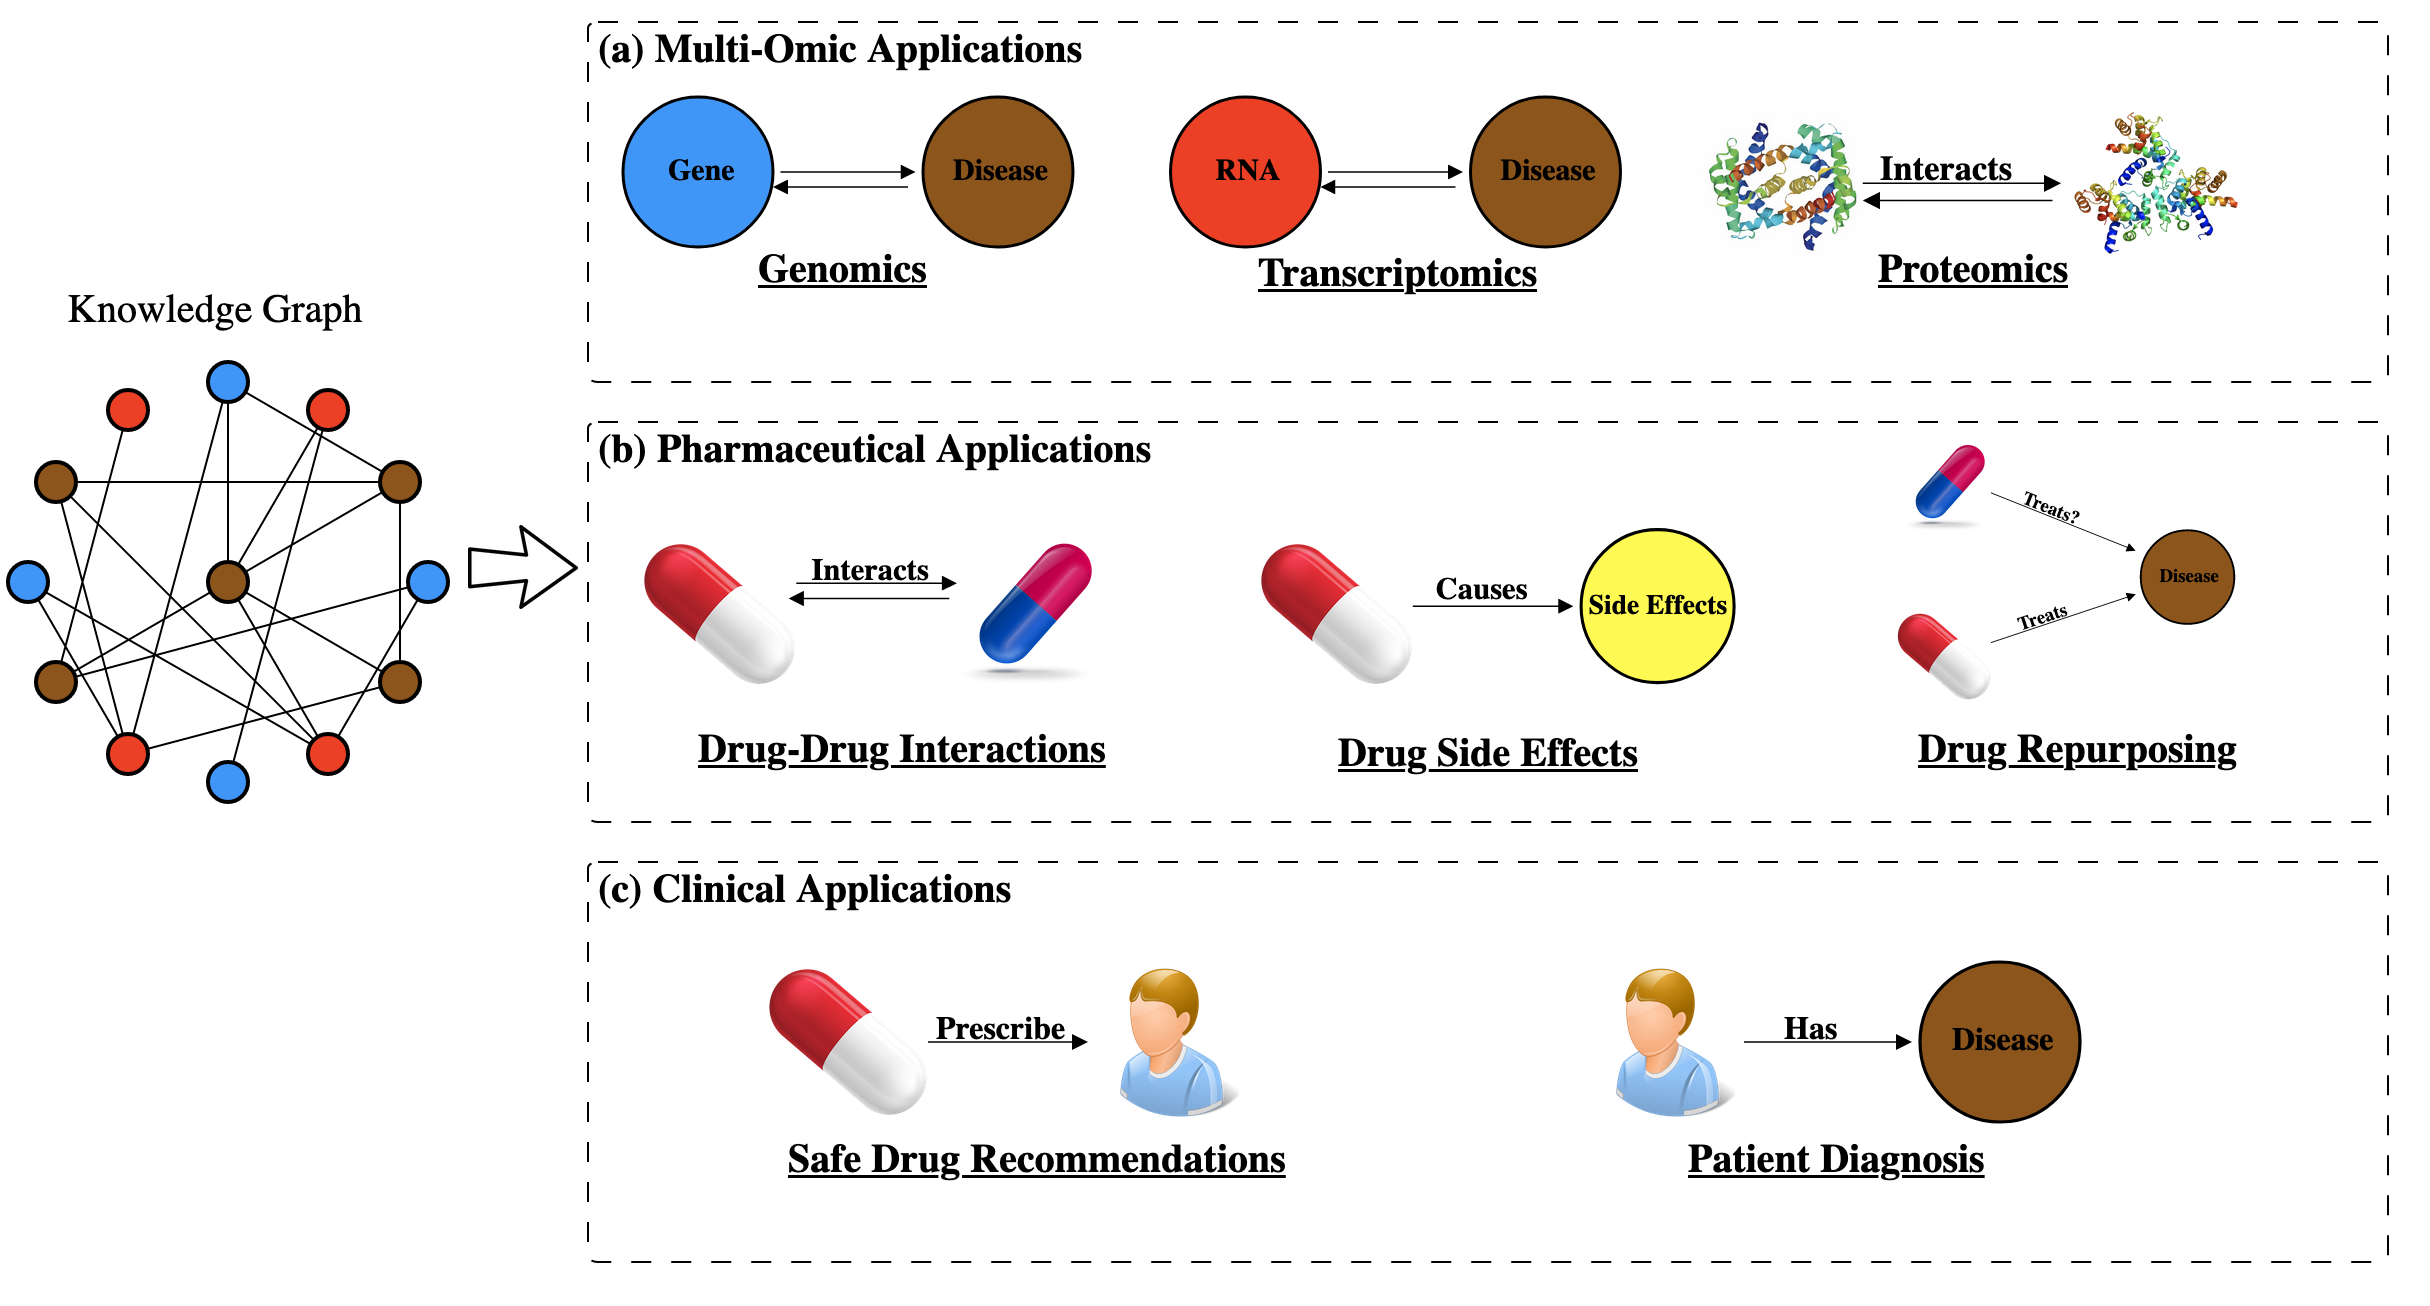 Figure 5: Overview of biomedical applications that make use of knowledge graphs. Categories consist of: (a) Multi-Omic applications, (b) Pharmaceutical Applications and (c) Clinical Applications.